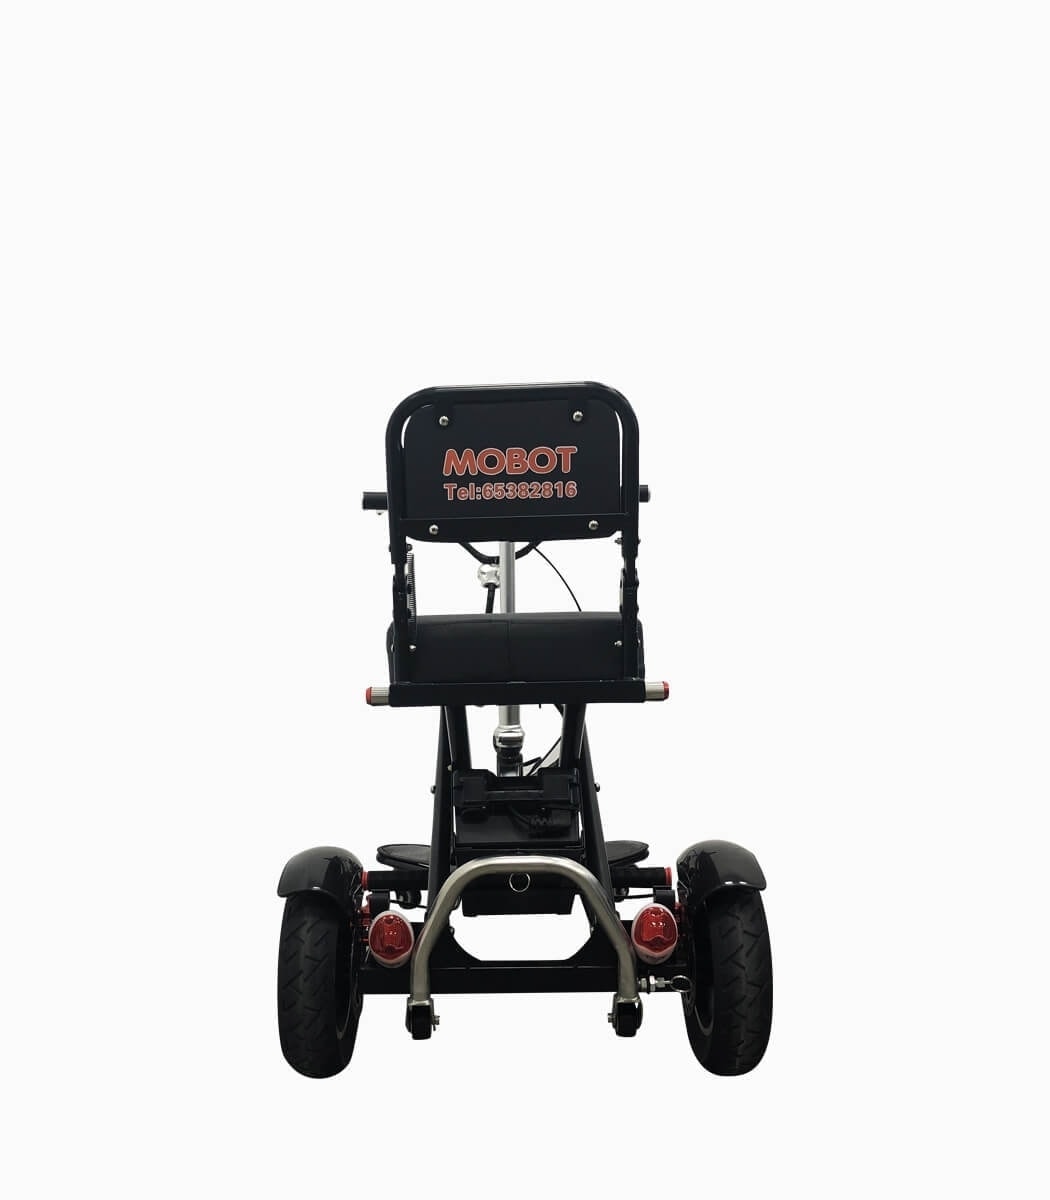 MOBOT FLEXI MAX (BLACK12AH) 3 wheel mobility scooter rear